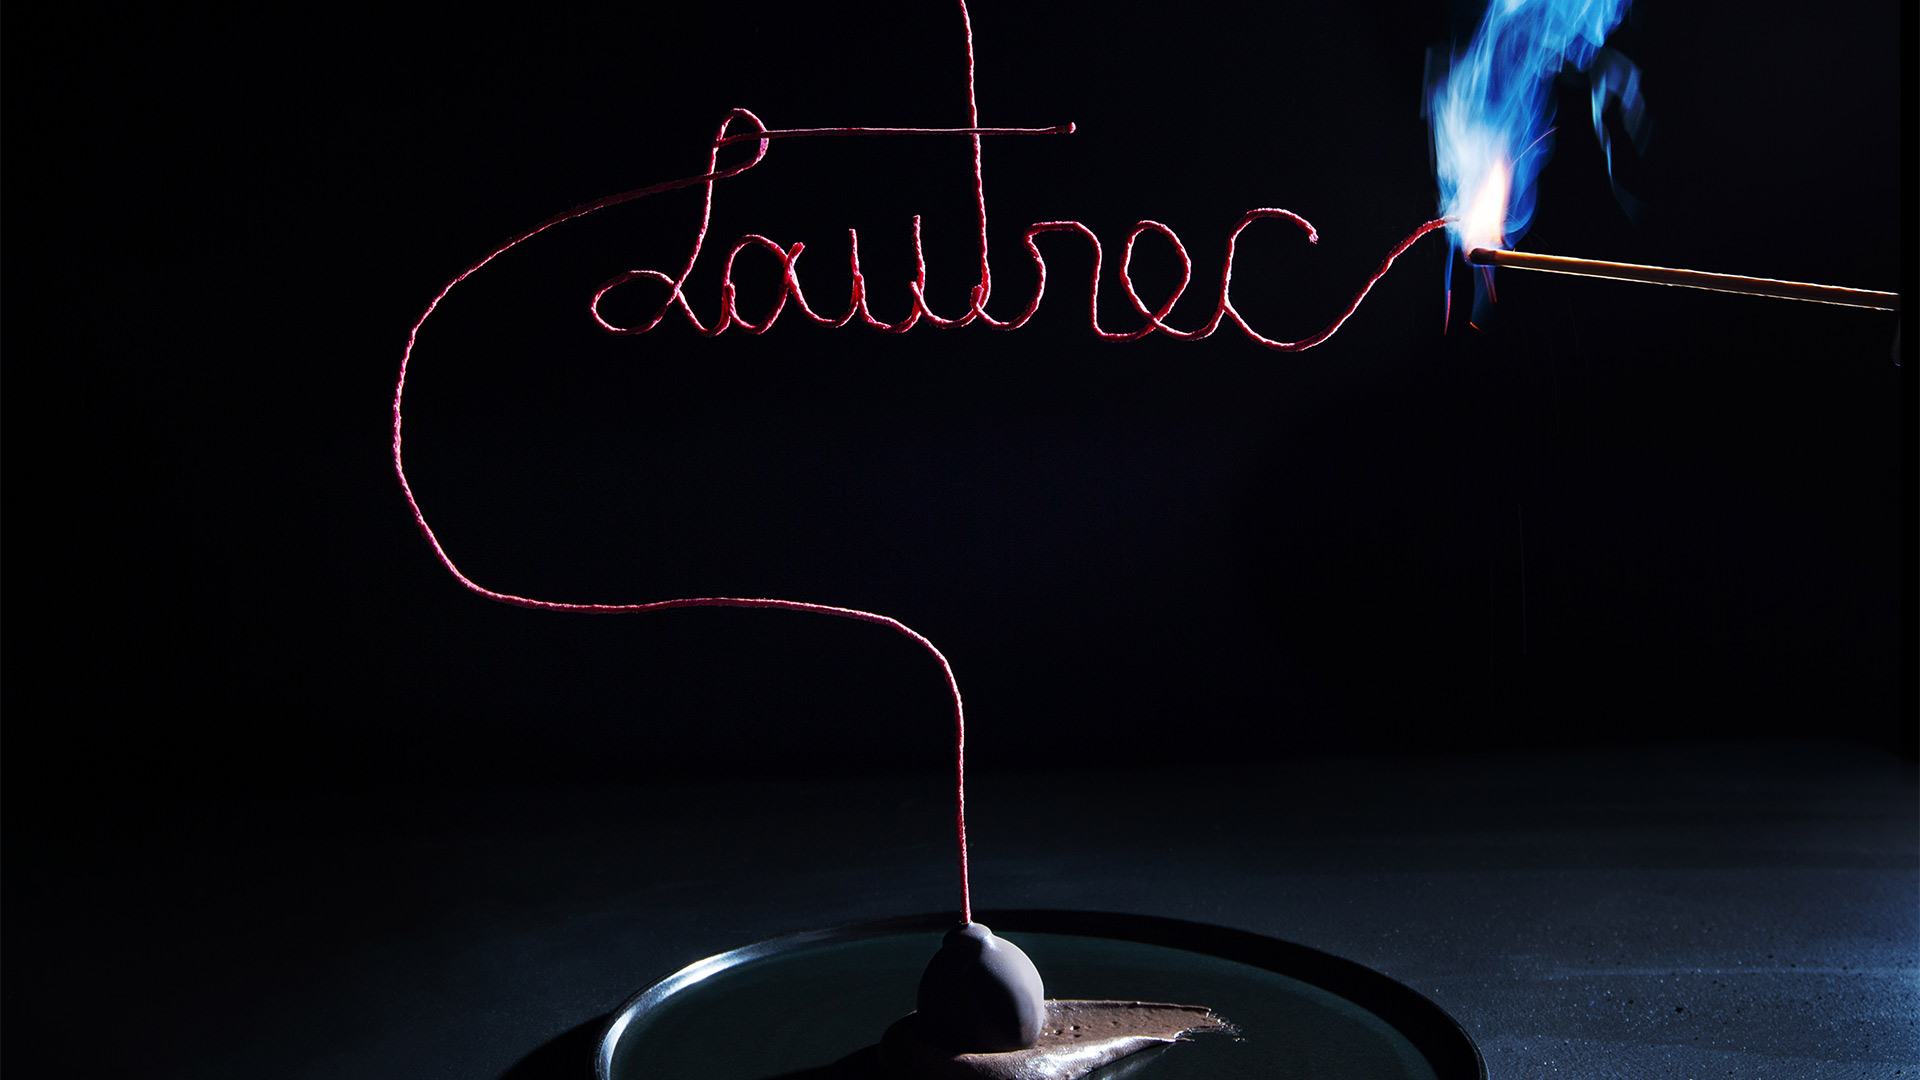 fancy wick spelling "Lautrec" in cursive being lit with a match